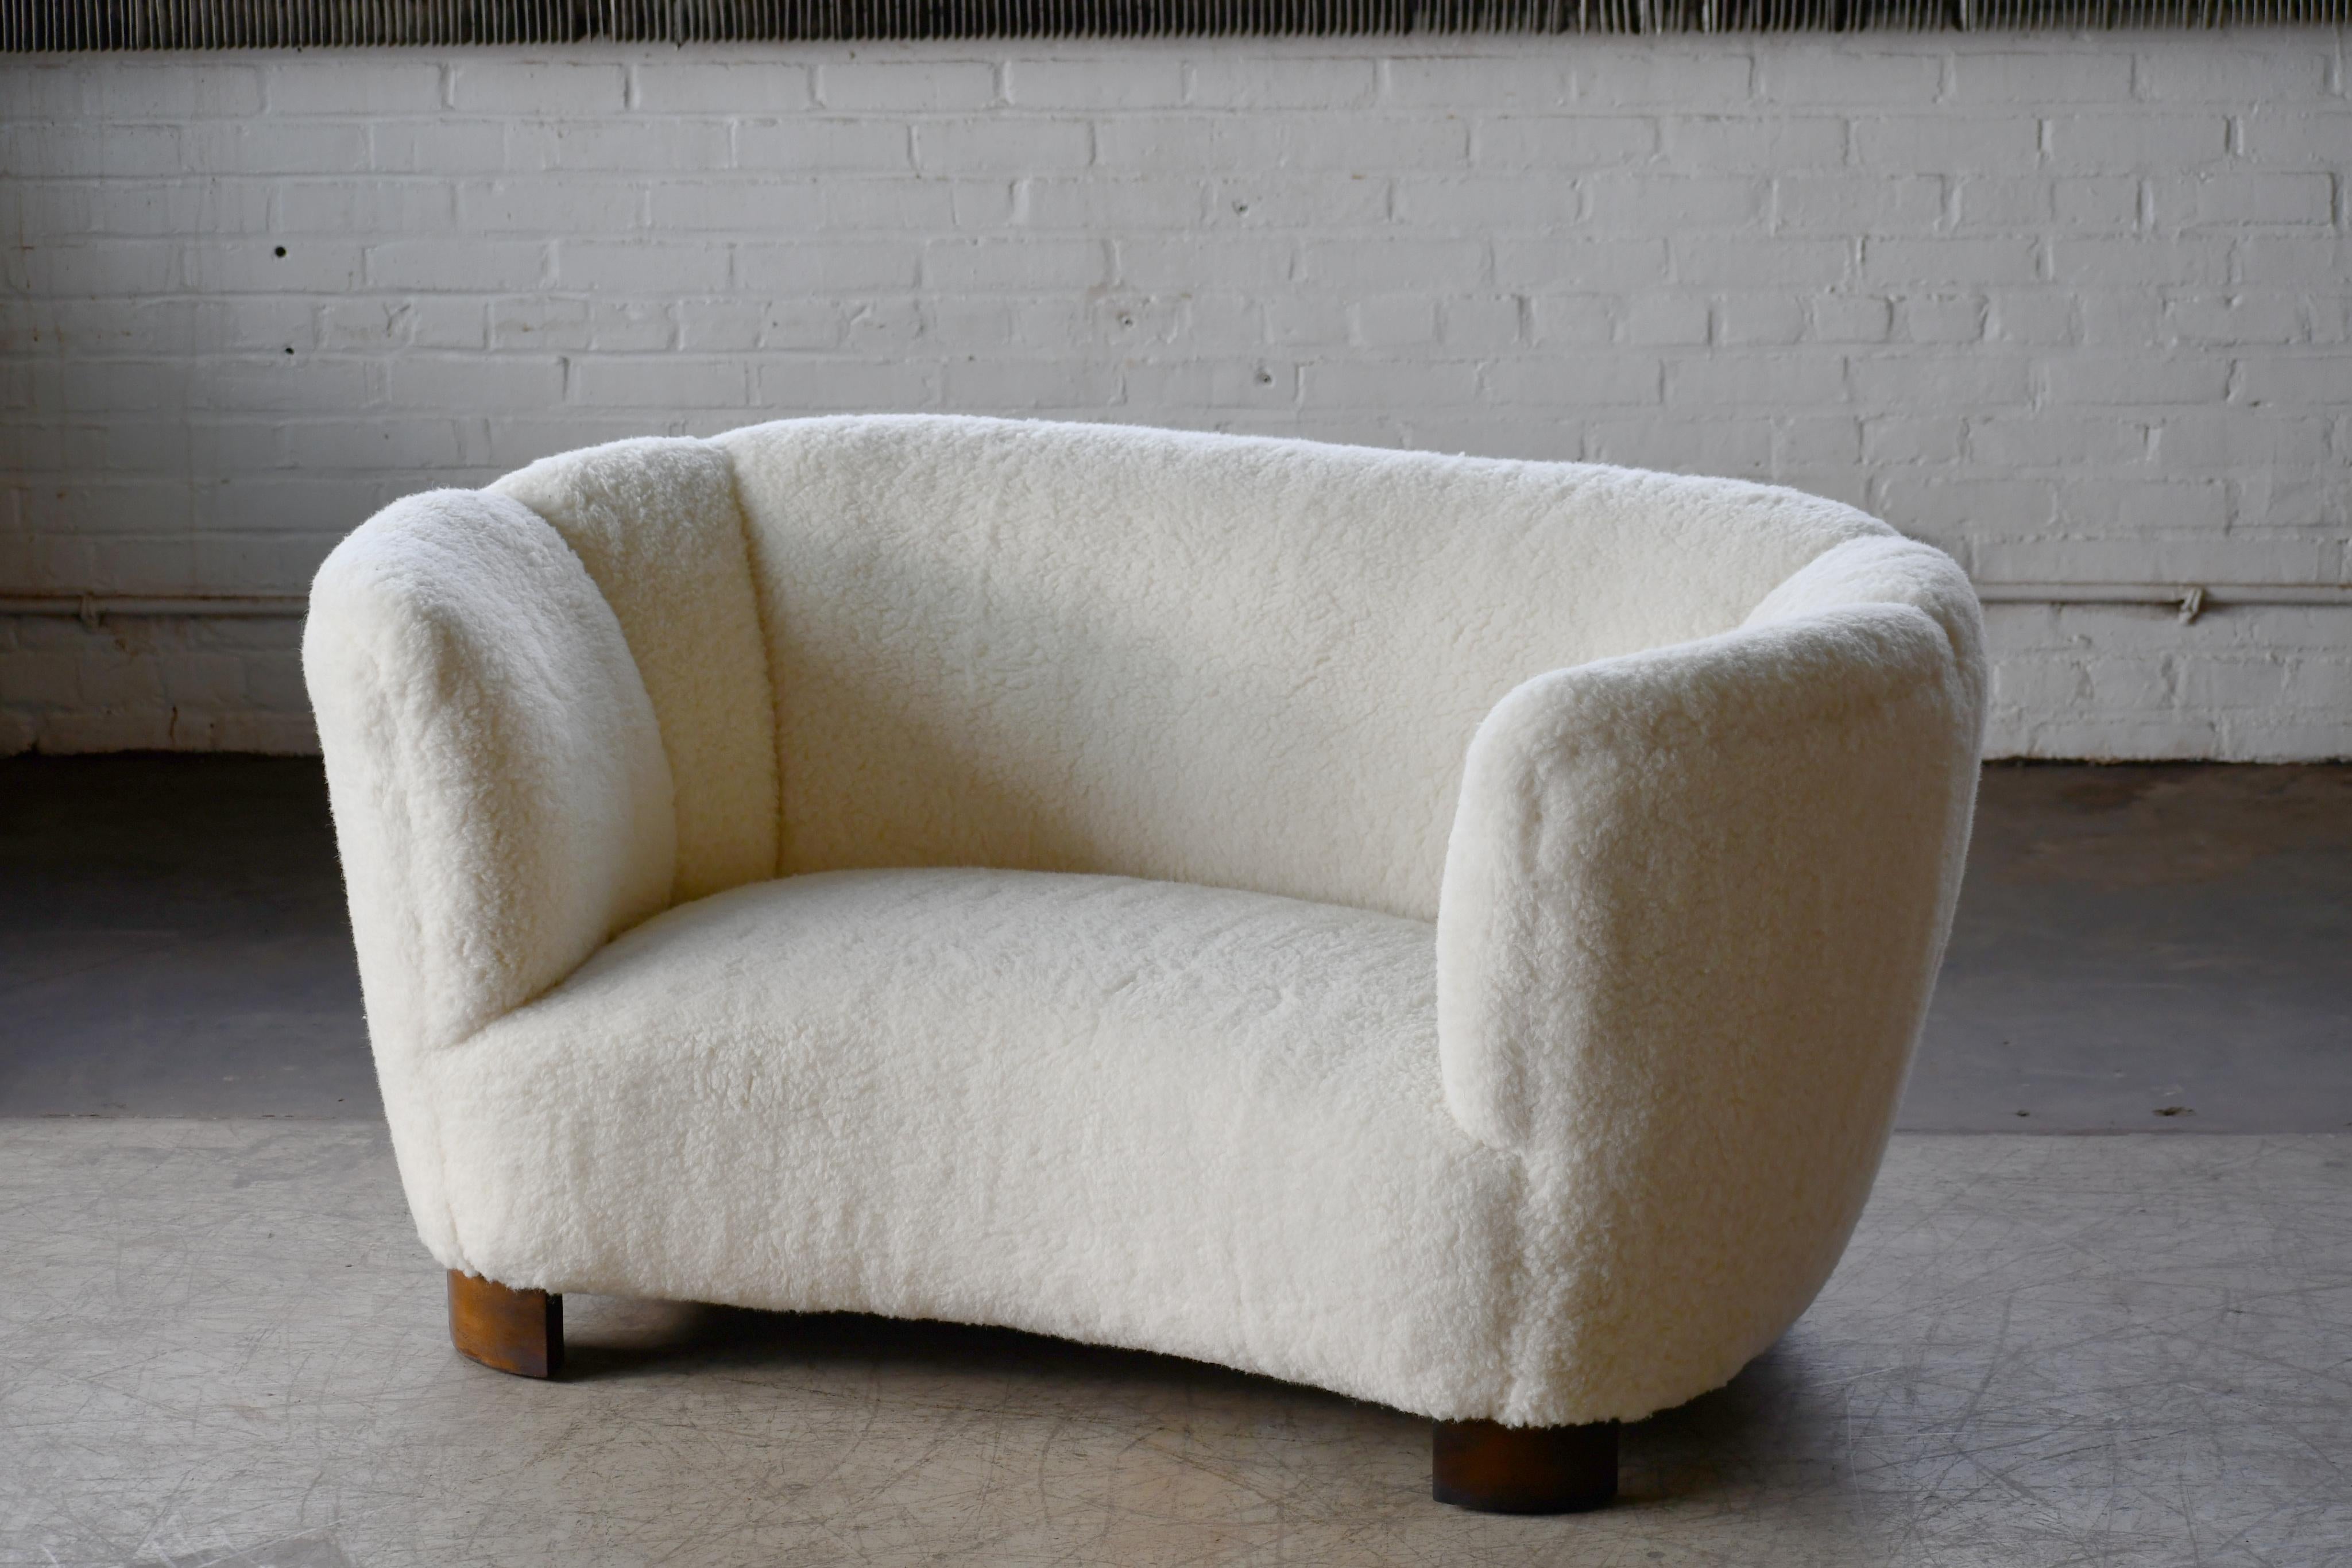 Banana shaped Viggo Boesen style curved two-seat sofa or loveseat made in Denmark in the 1940s. This sofa will make a strong statement in any room despite the smaller size. Beautiful round lines and iconic block feet normally associated with